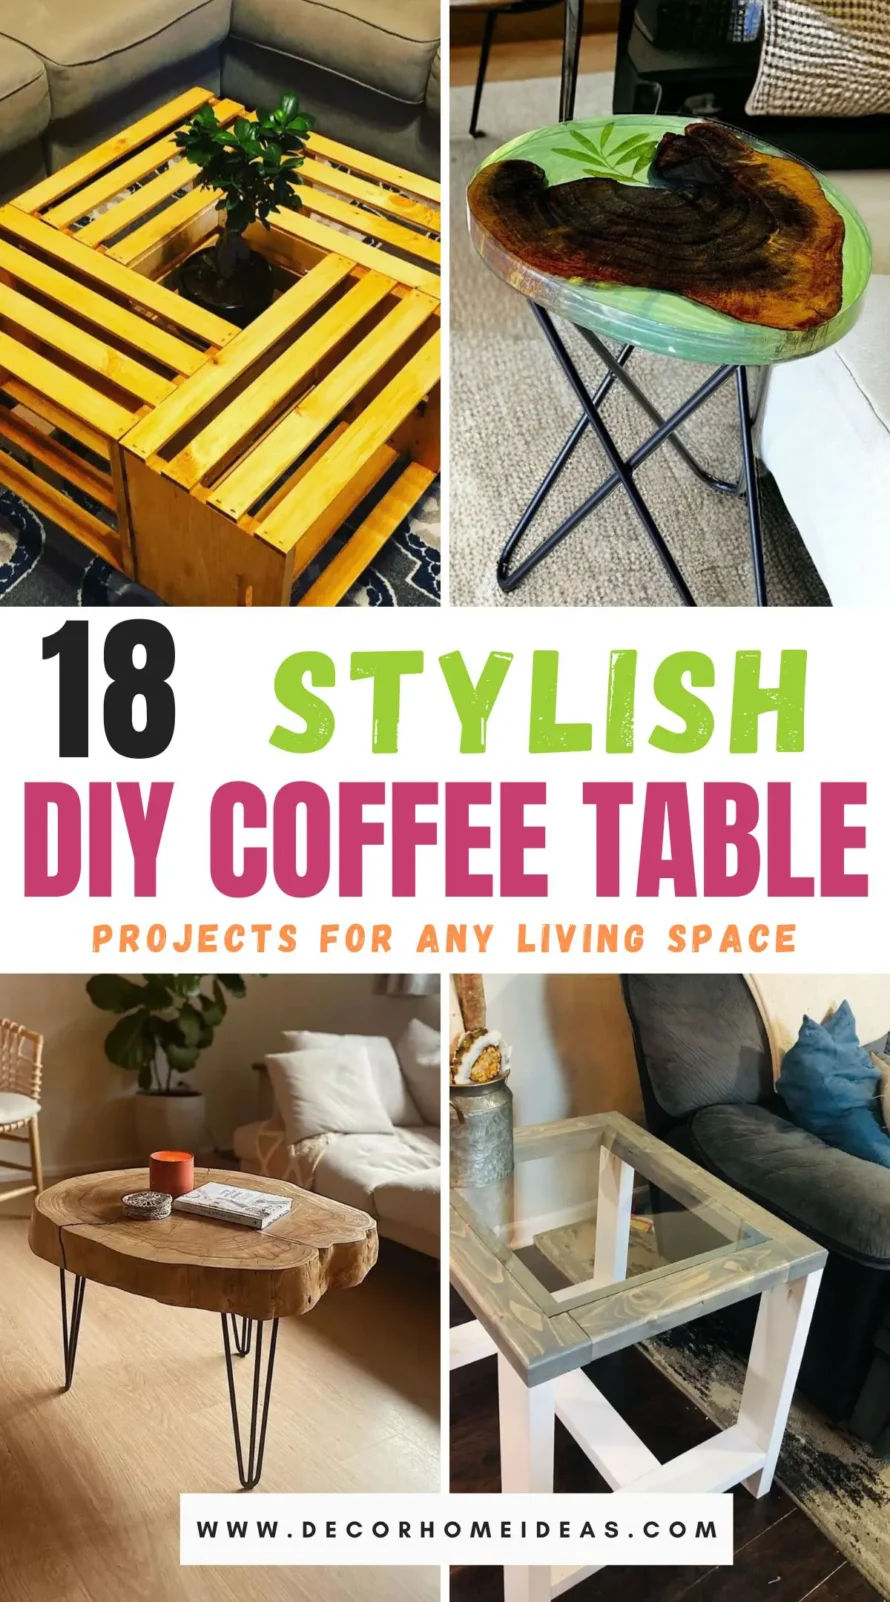 Transform your living space with these 18 chic DIY coffee tables, each uniquely crafted to suit various styles and sizes of rooms. From minimalist designs to rustic finishes, these coffee tables add both functionality and flair to any home decor.